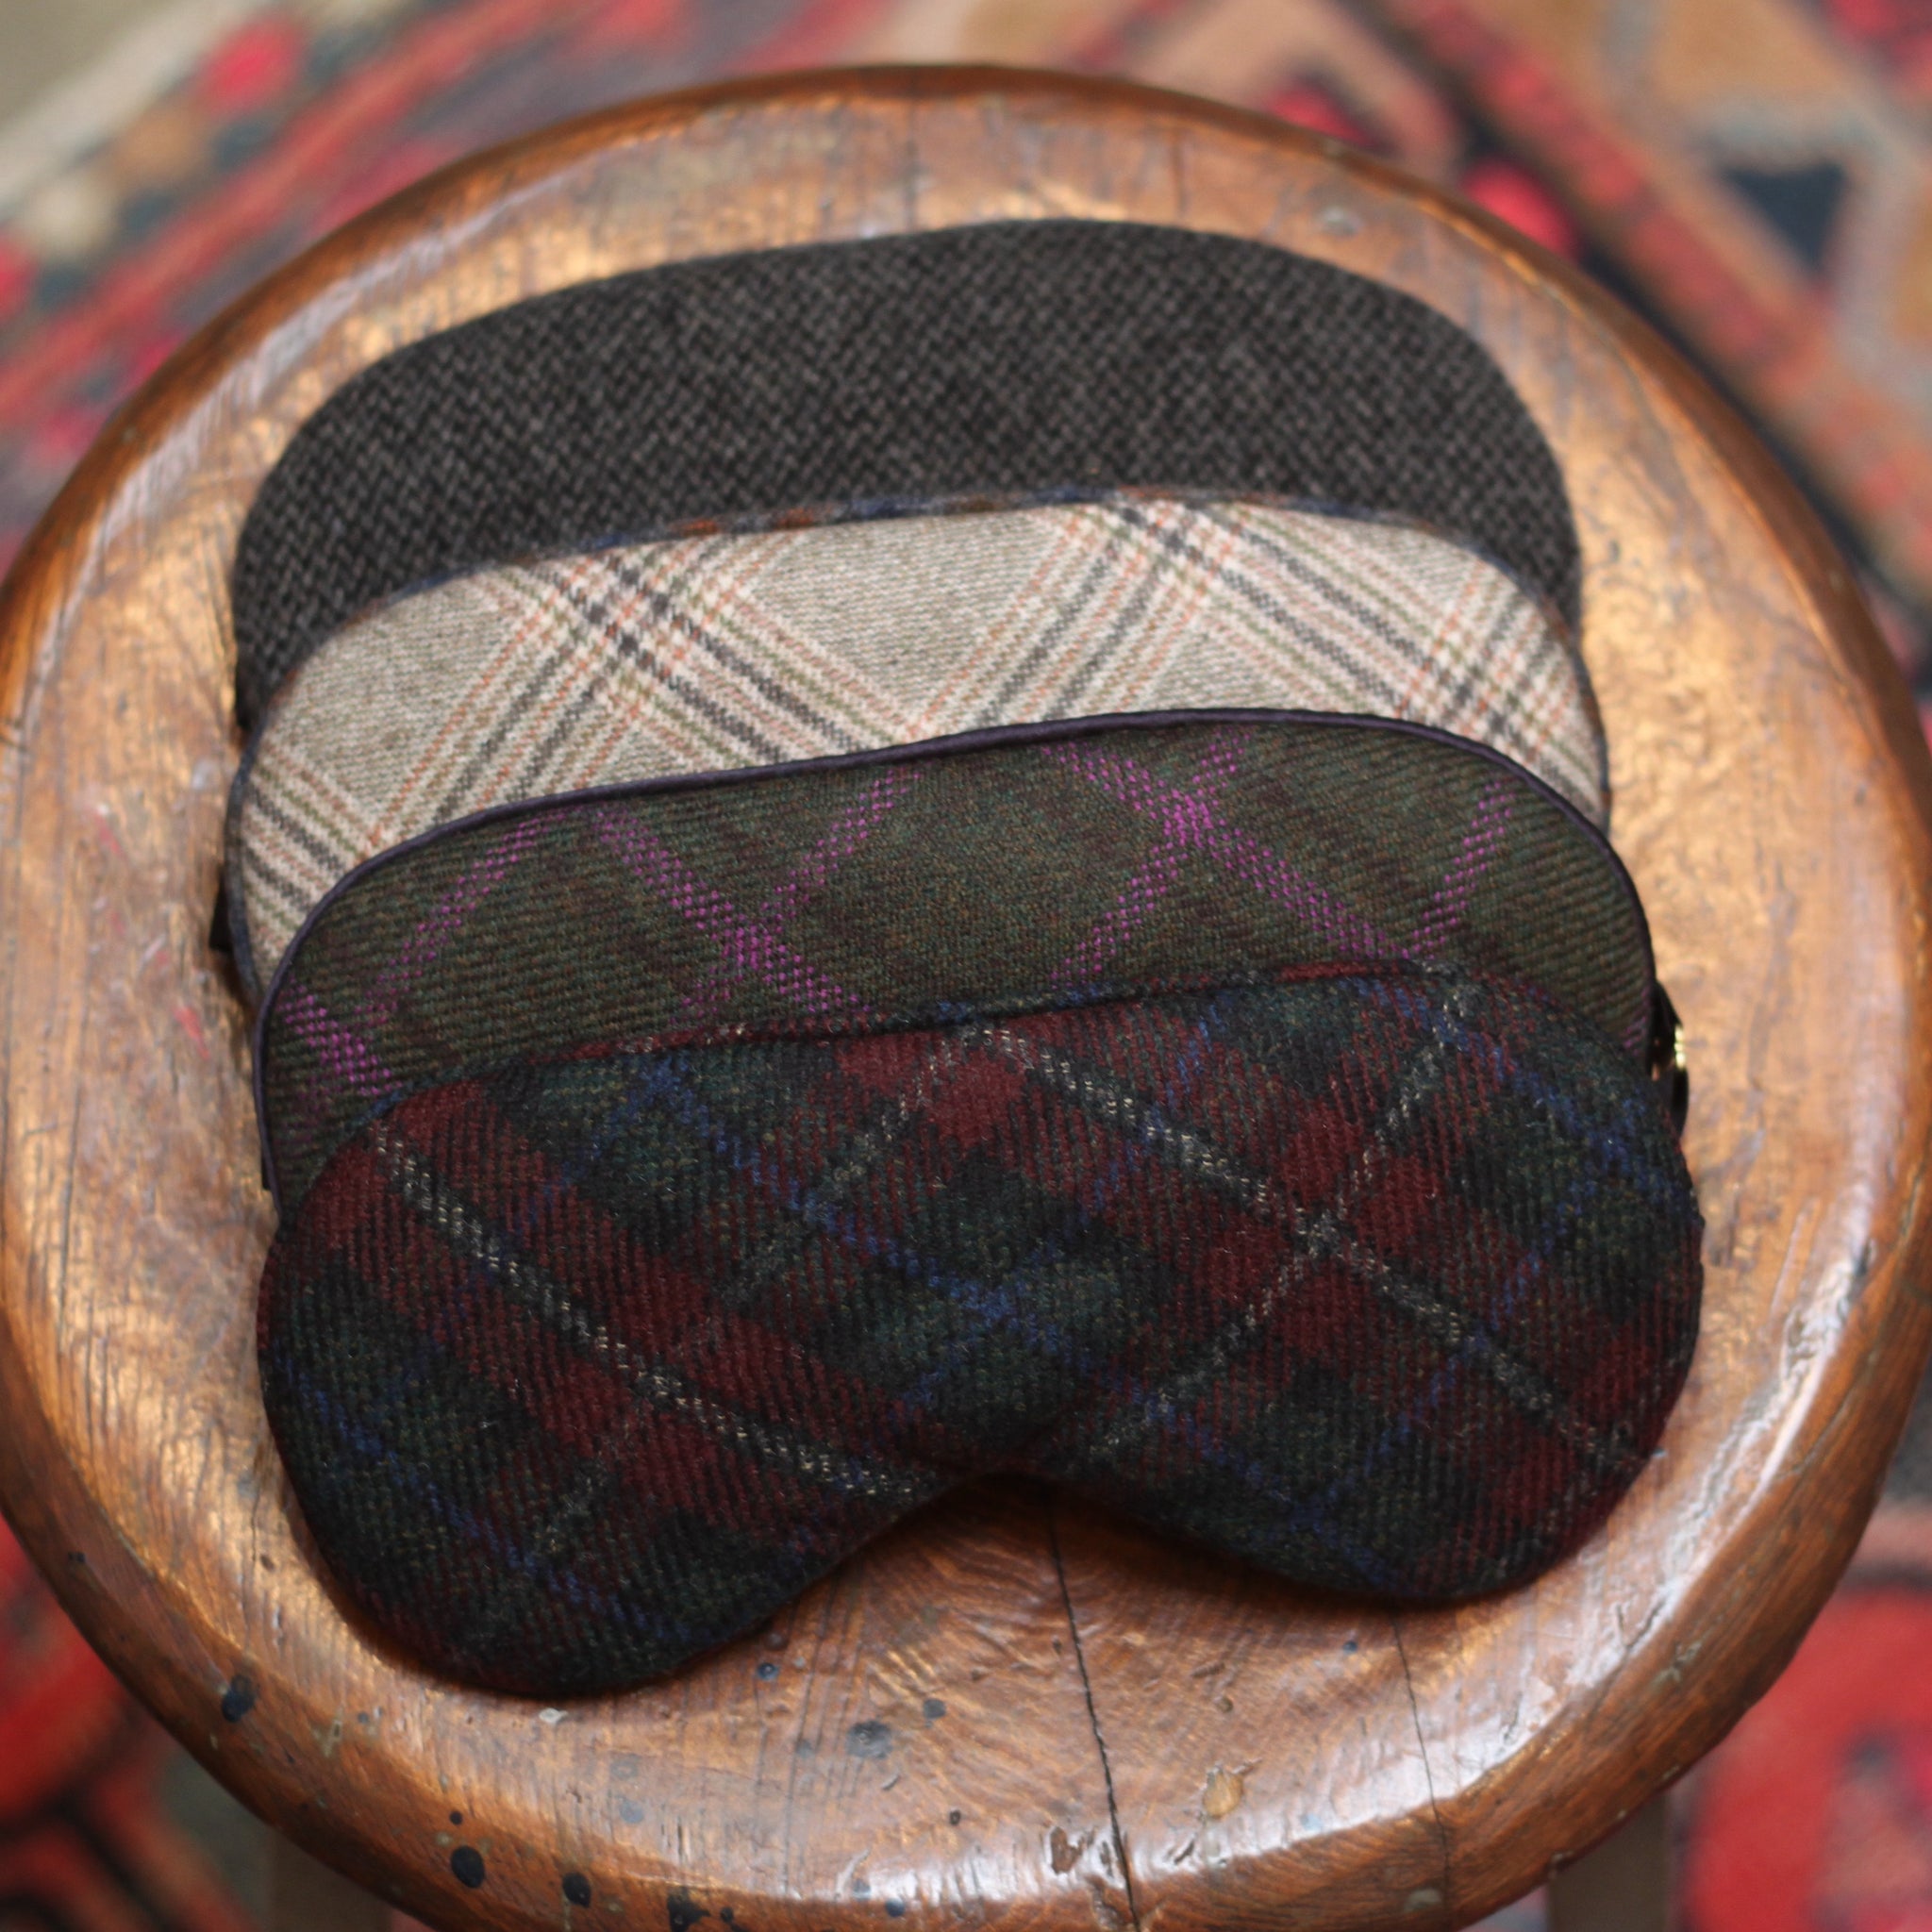 Hypnos Sleep Mask in Charcoal + Purple Plaid Cashmere